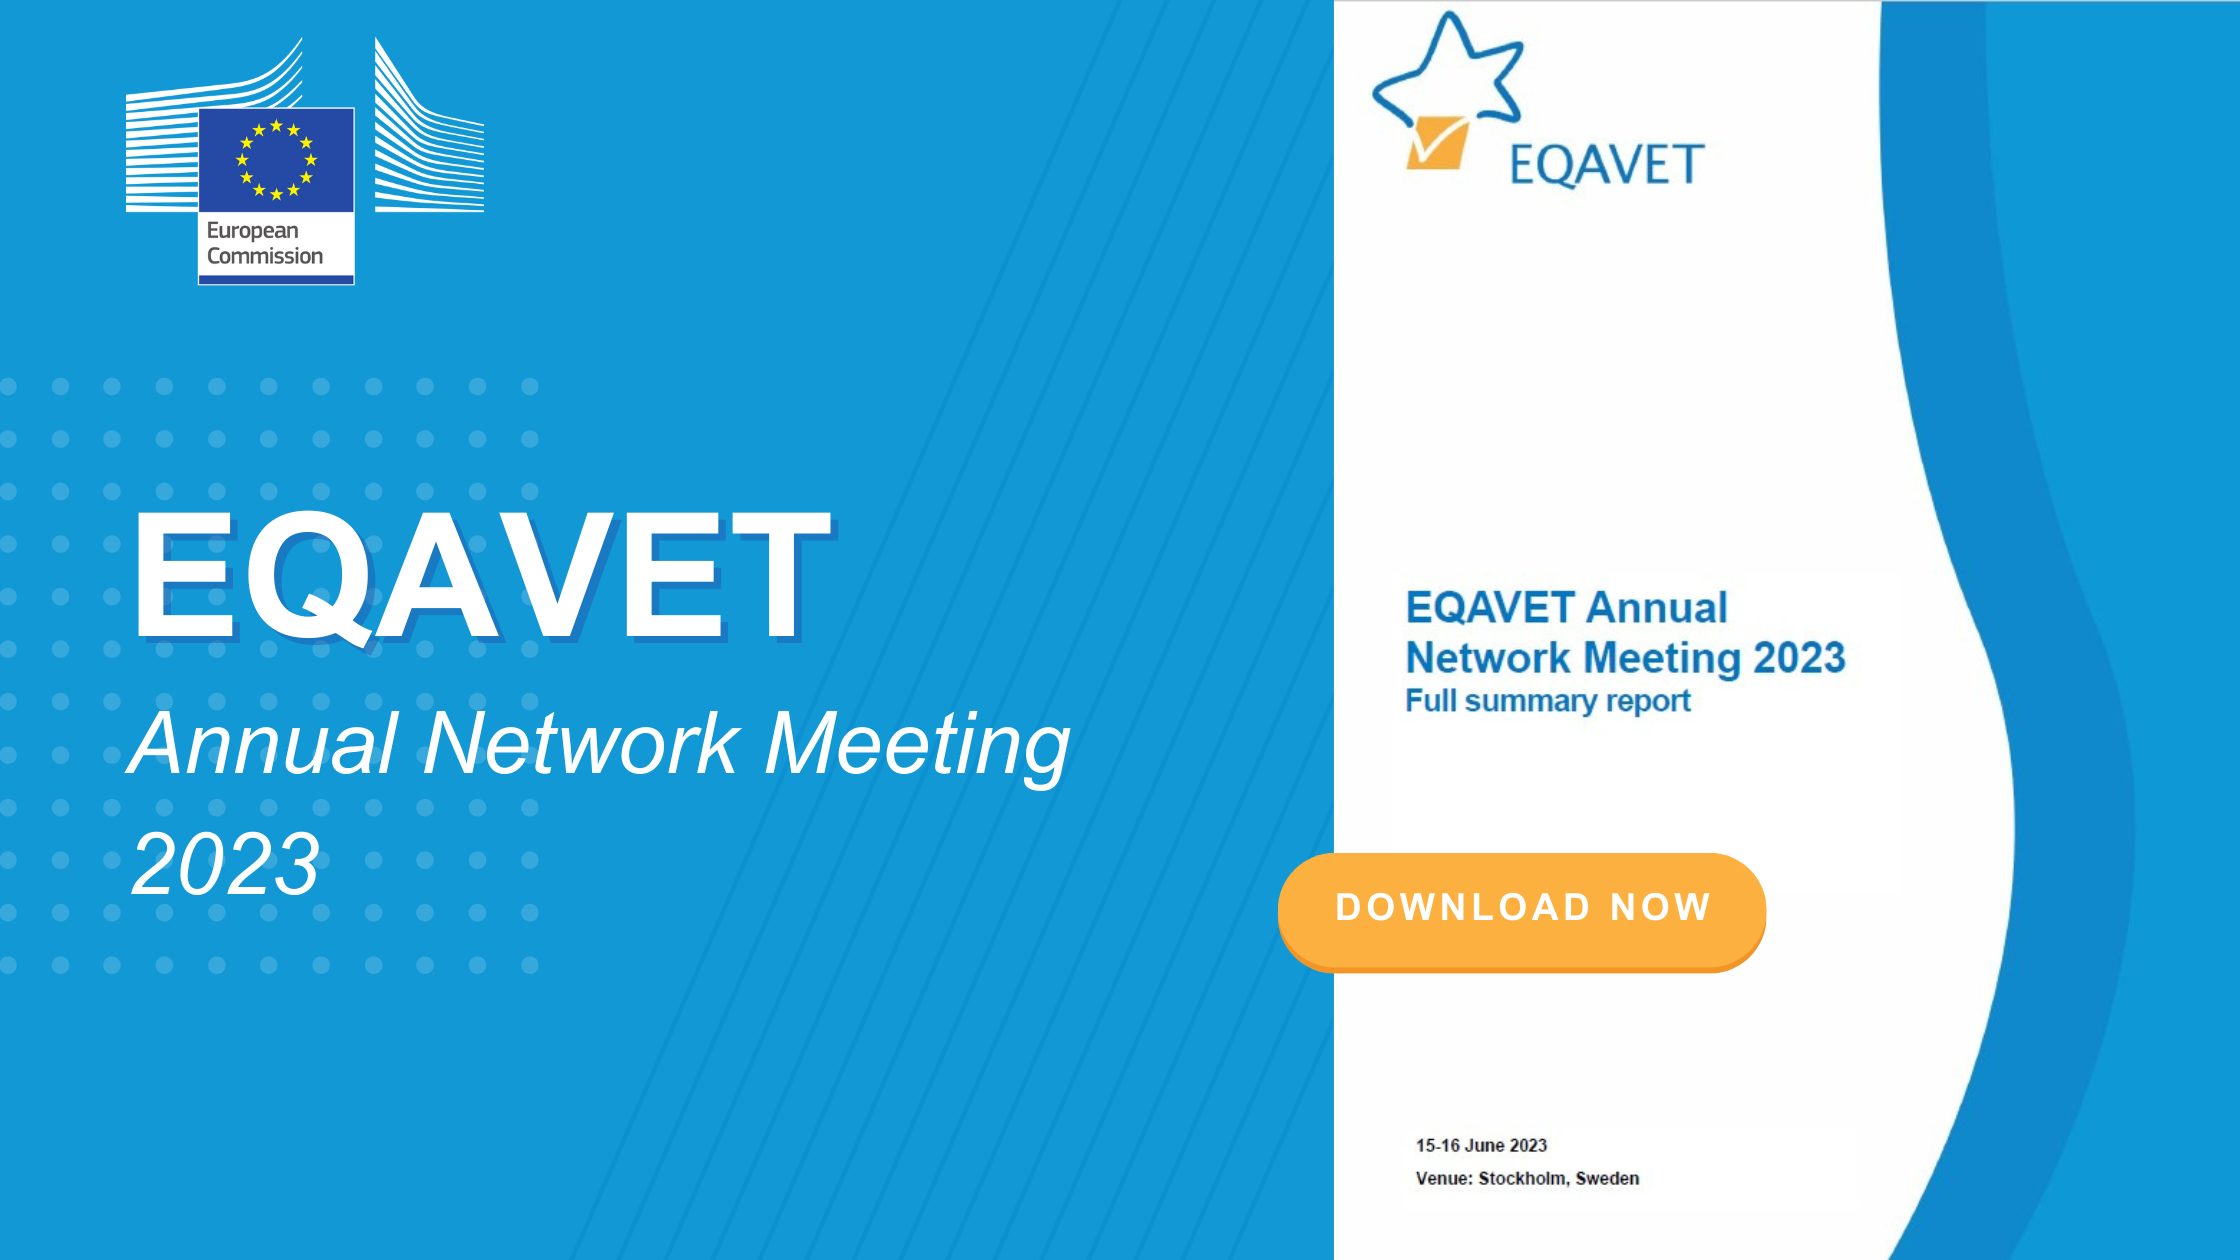 Report of the 2023 EQAVET Annual Network Meeting now available